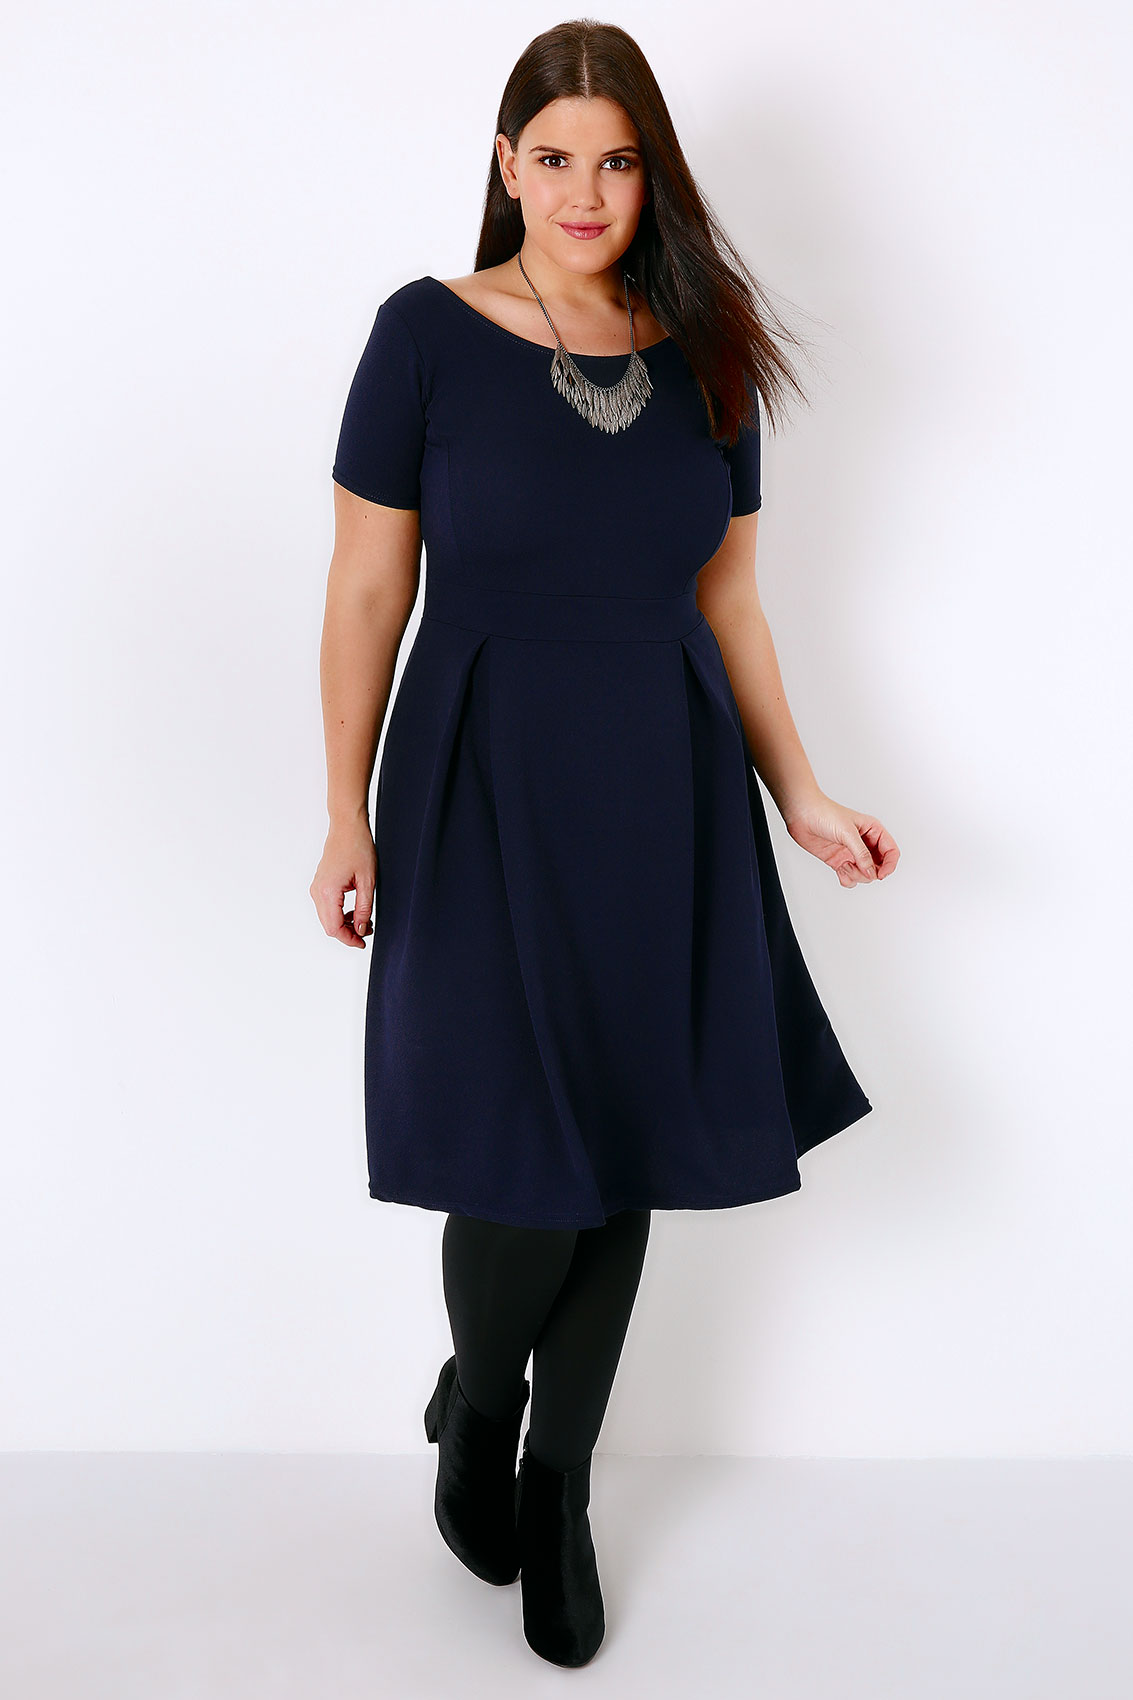 SIENNA COUTURE Navy Sleeved Skater Dress Plus size 16 to 26